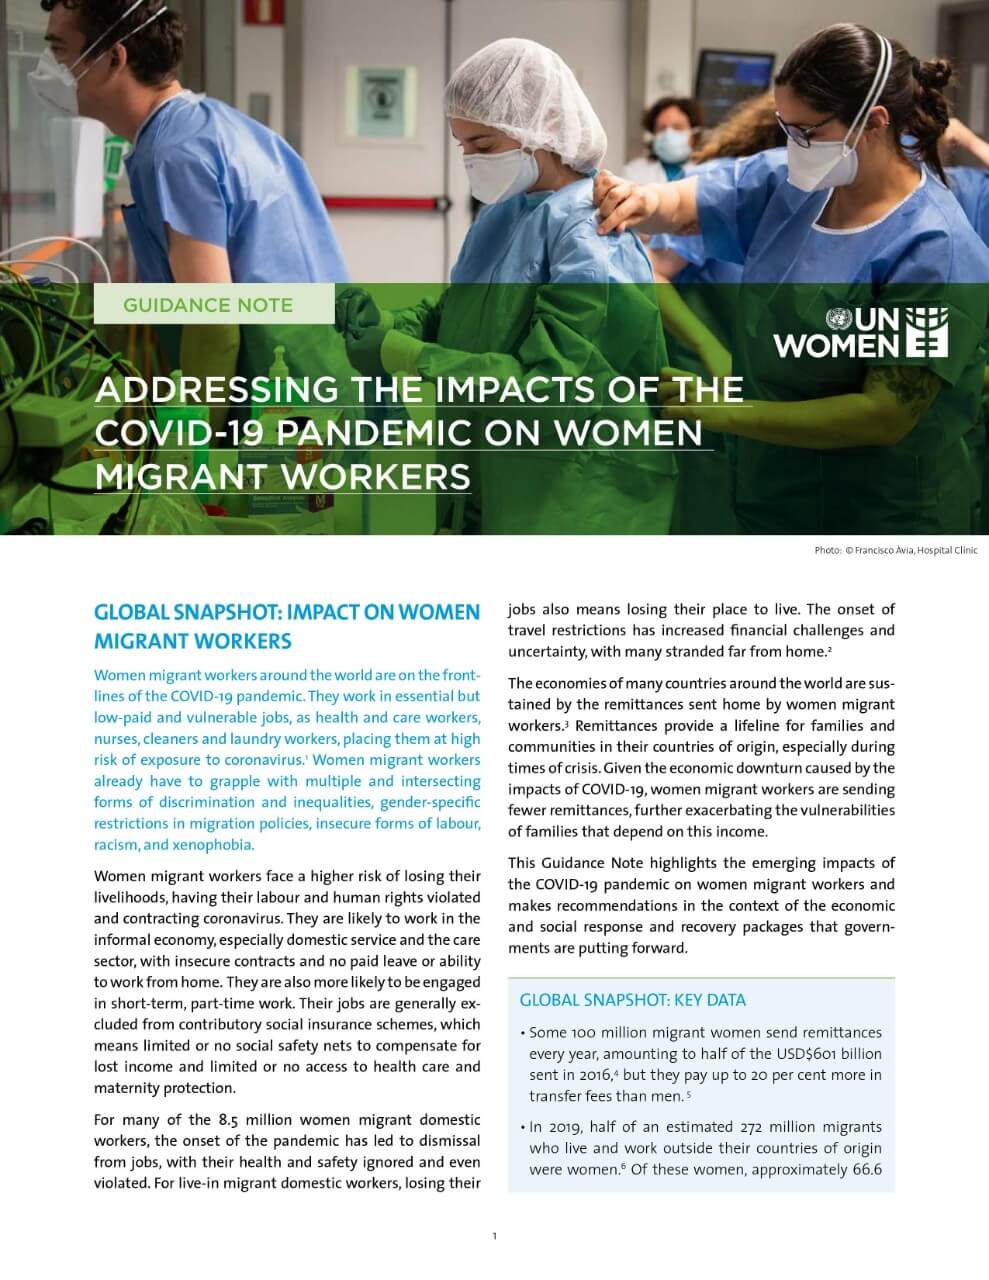 Impact of Covid 19 on women migrant workers